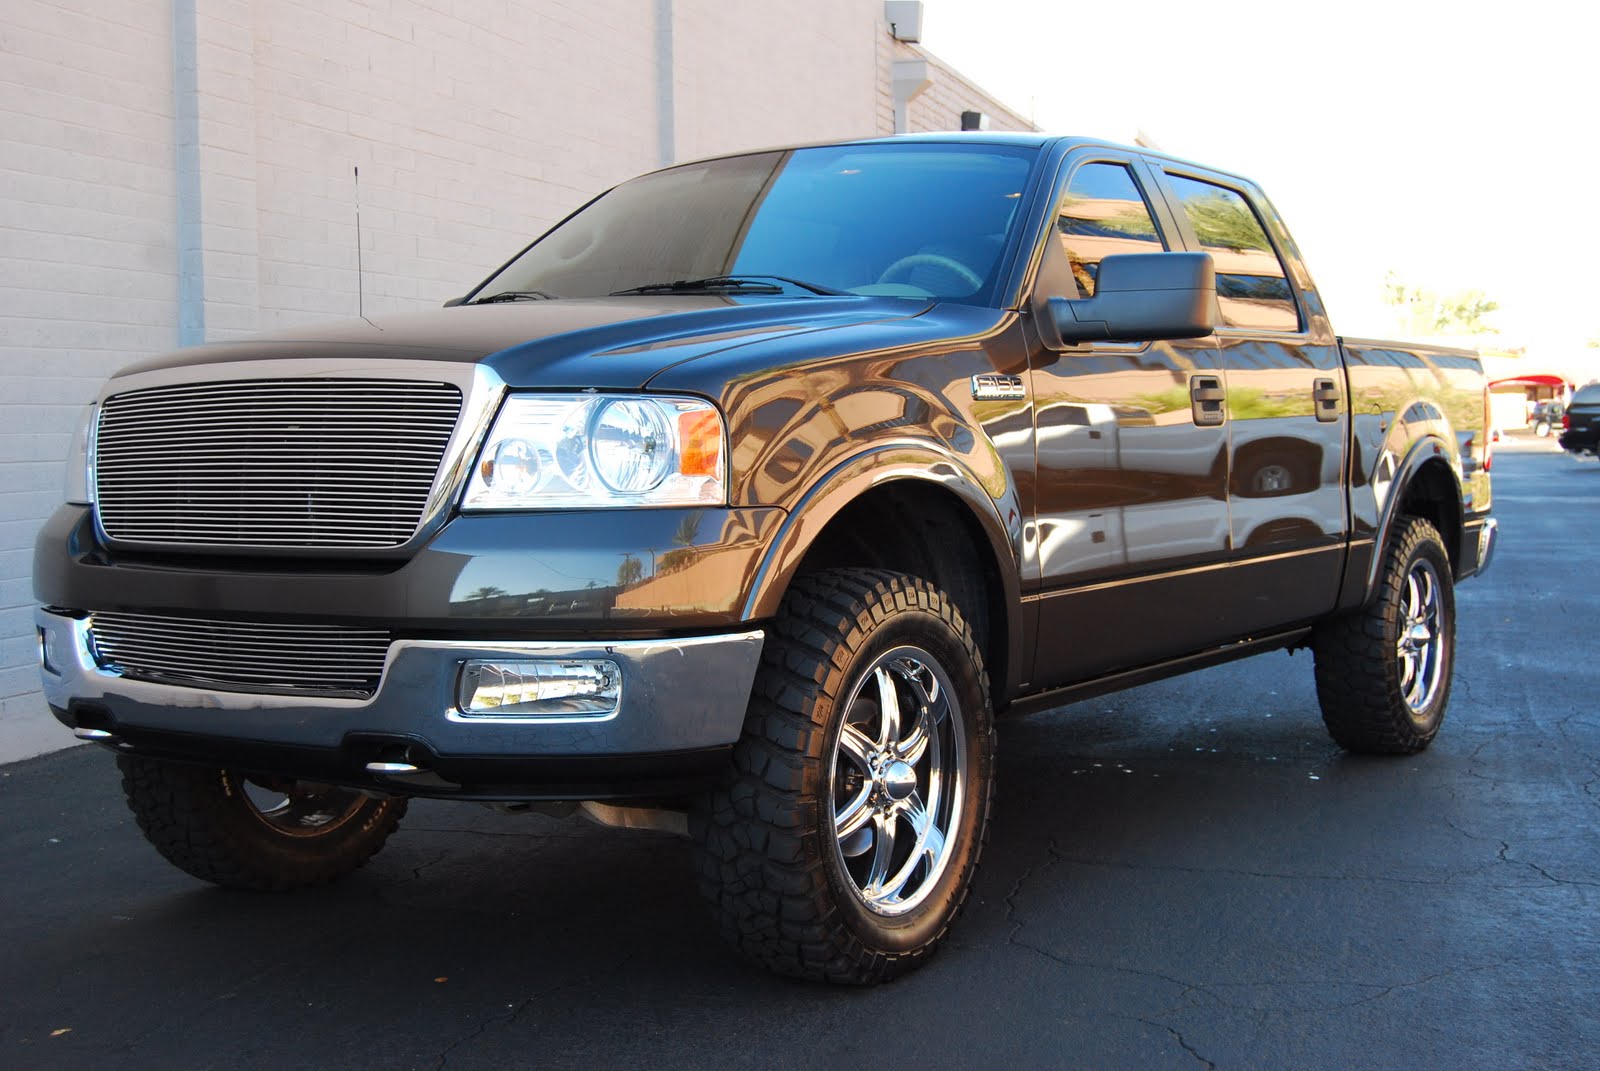 2005 Ford f150 upgrades